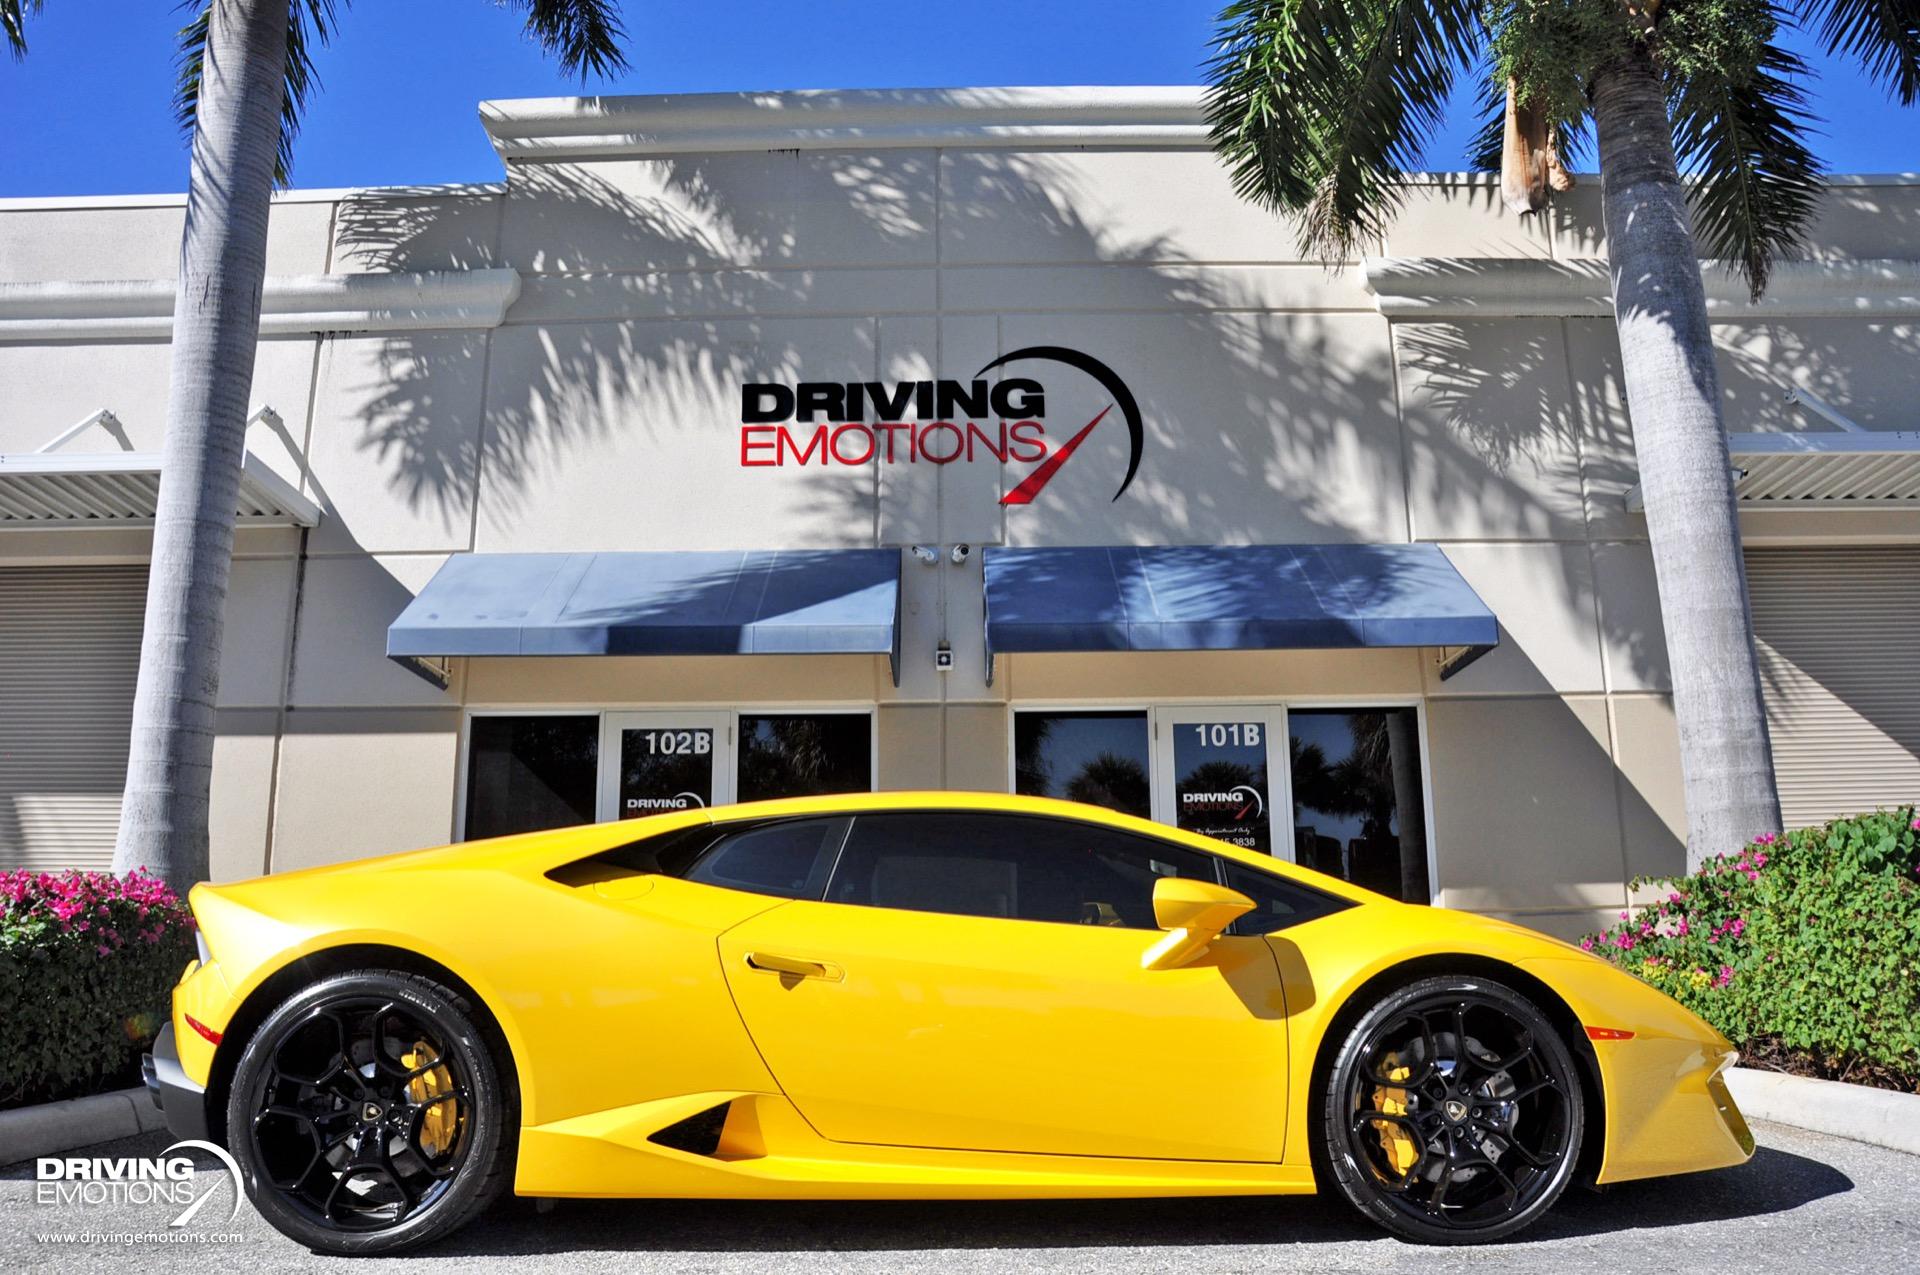 Used 2017 Lamborghini Huracan LP580-2 Coupe LP 580-2 SPORT EXHAUST! TECHNOLOGY PACKAGE! GLASS ENGINE BAY!! | Lake Park, FL